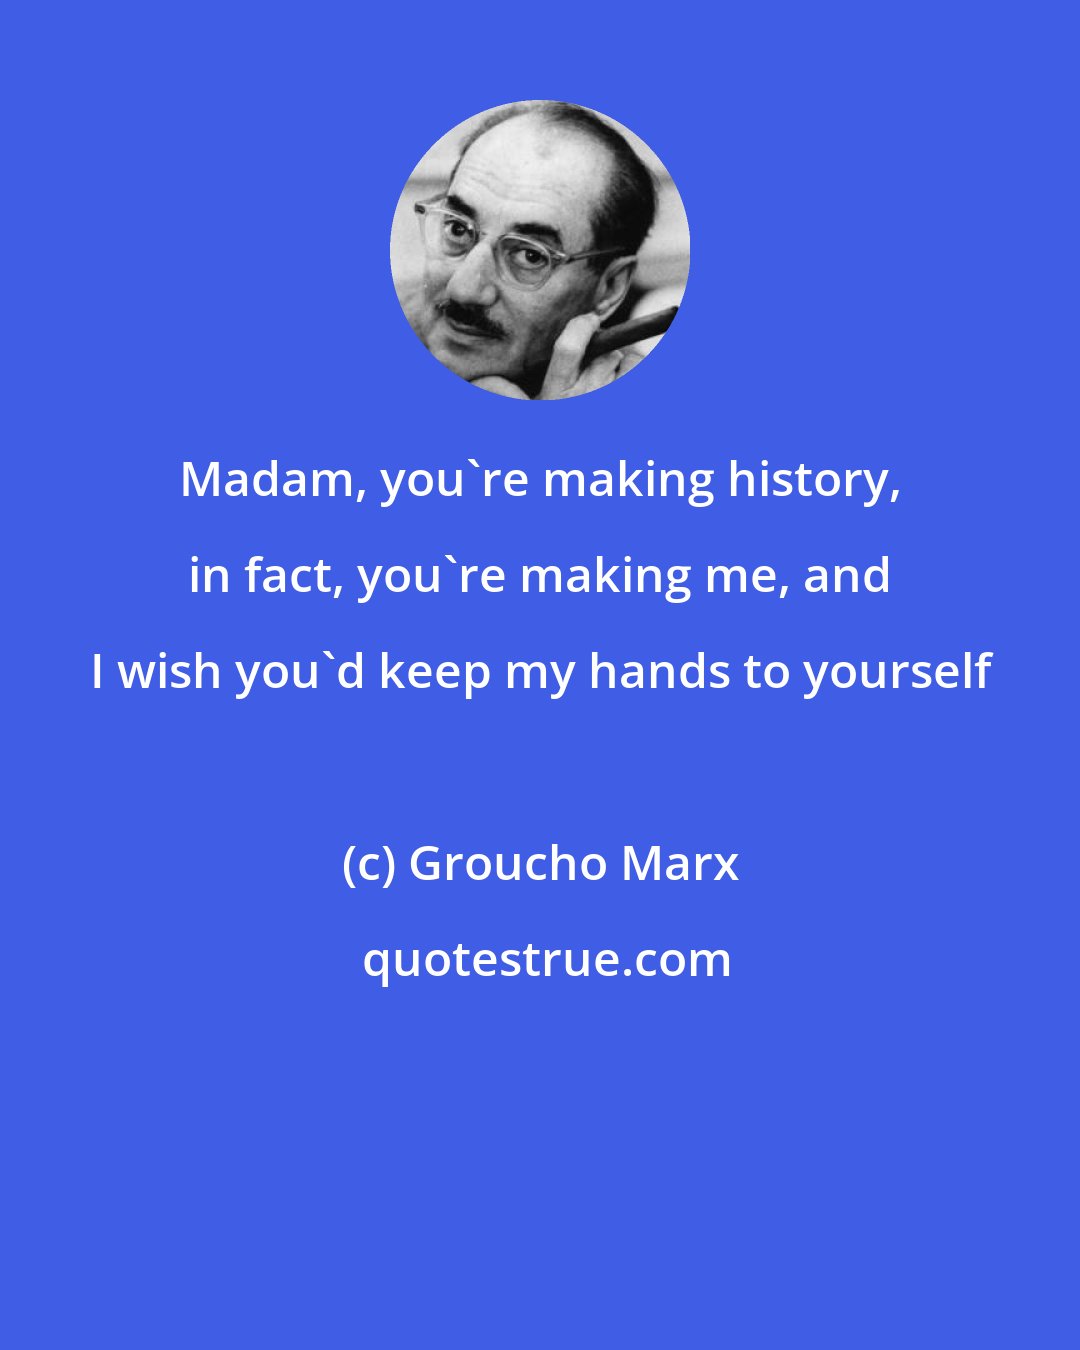 Groucho Marx: Madam, you're making history, in fact, you're making me, and I wish you'd keep my hands to yourself